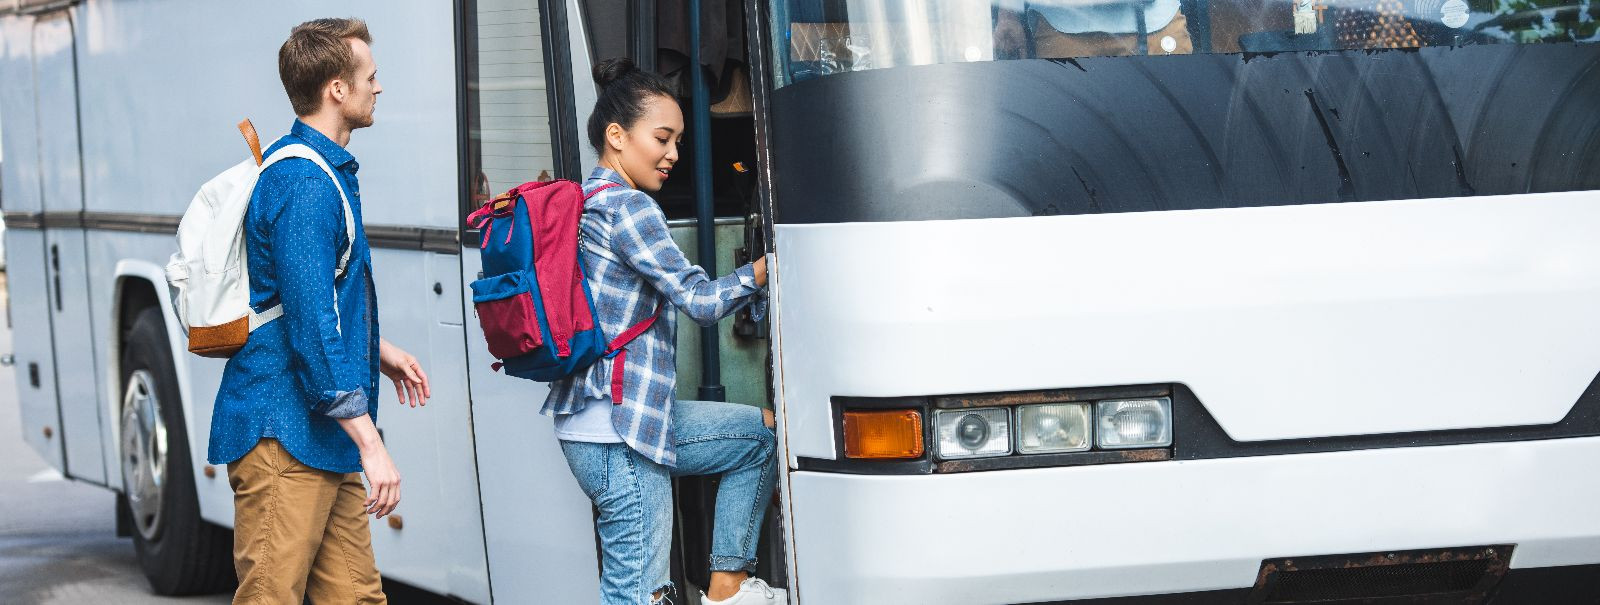 When planning a school trip, transportation is a critical component that can significantly impact the overall experience. The choice of vehicle not only affects